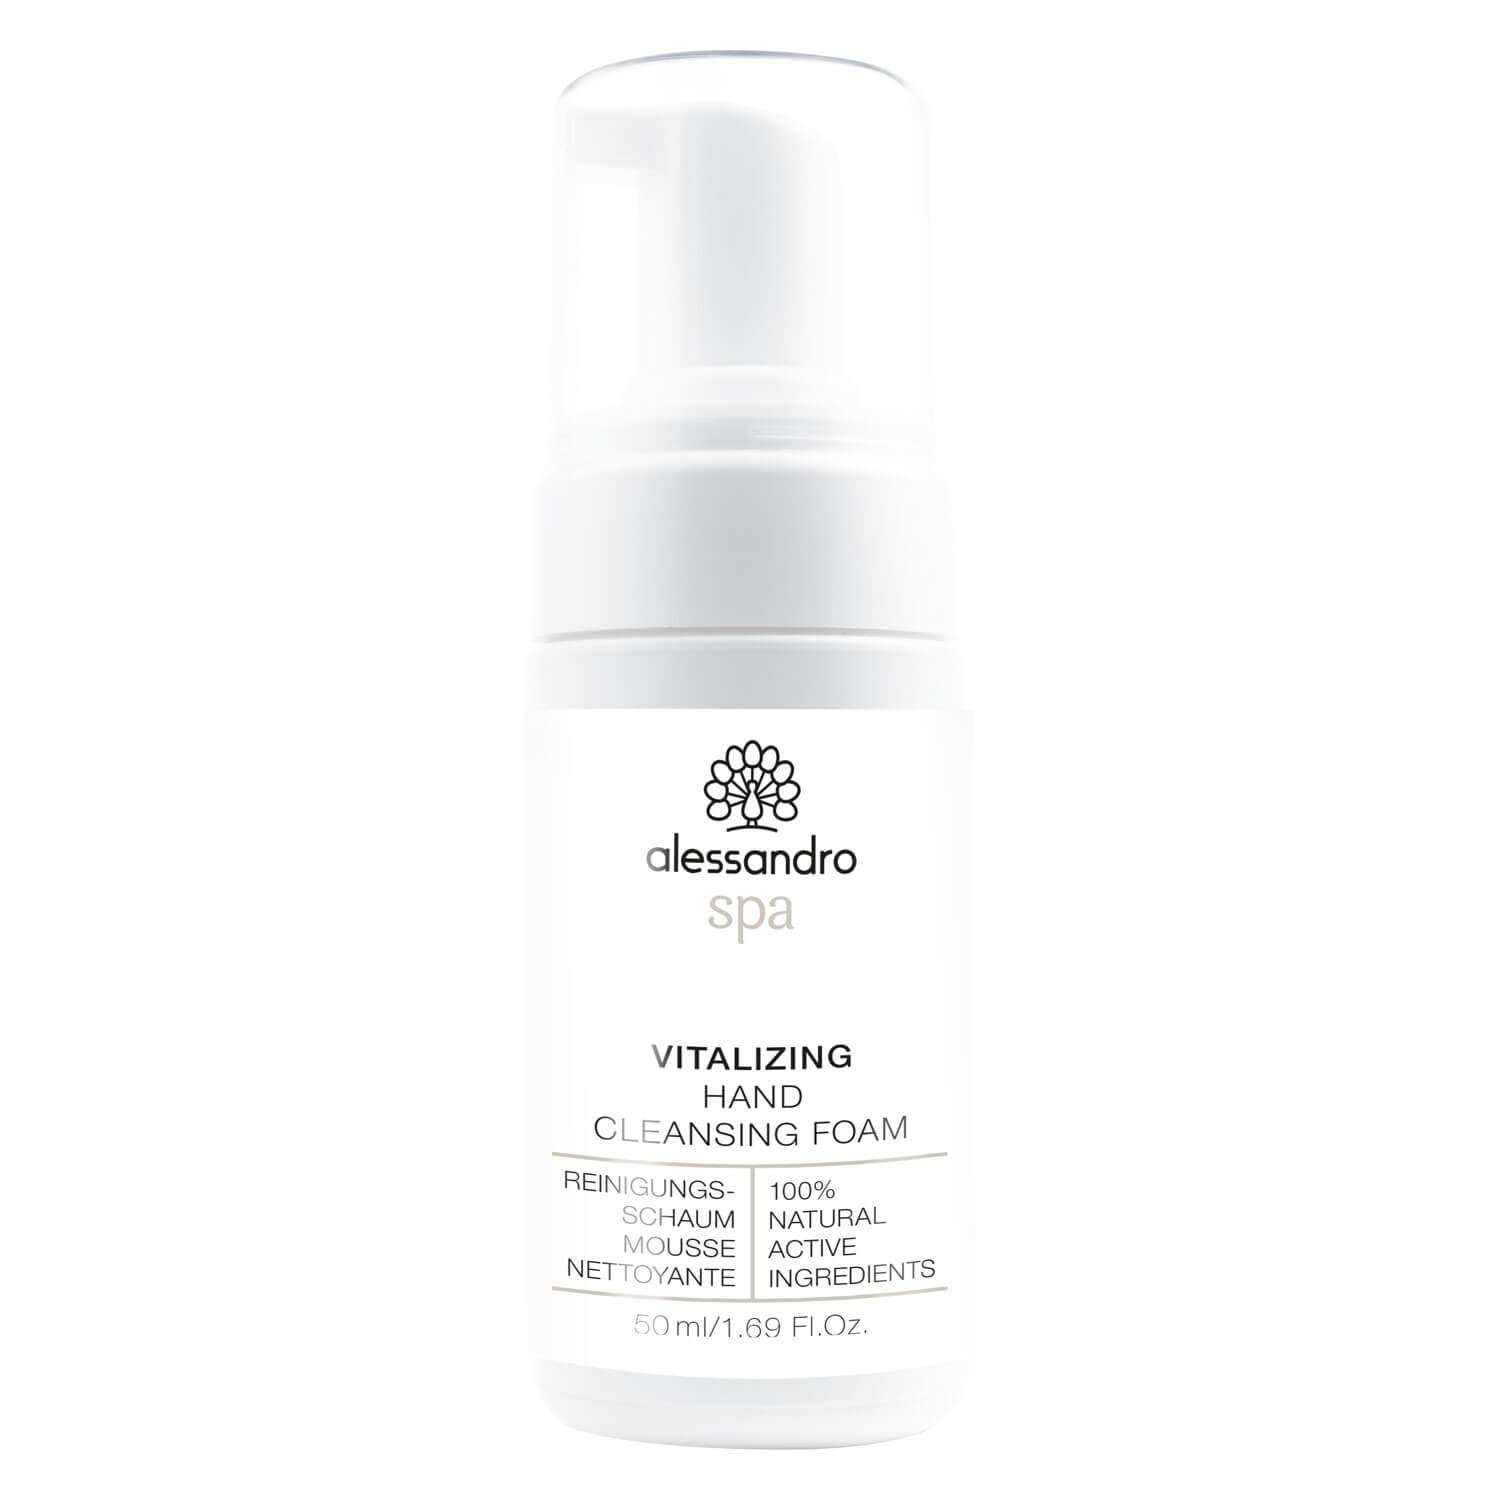 Alessandro Spa - Vitalizing Hand Cleansing Foam